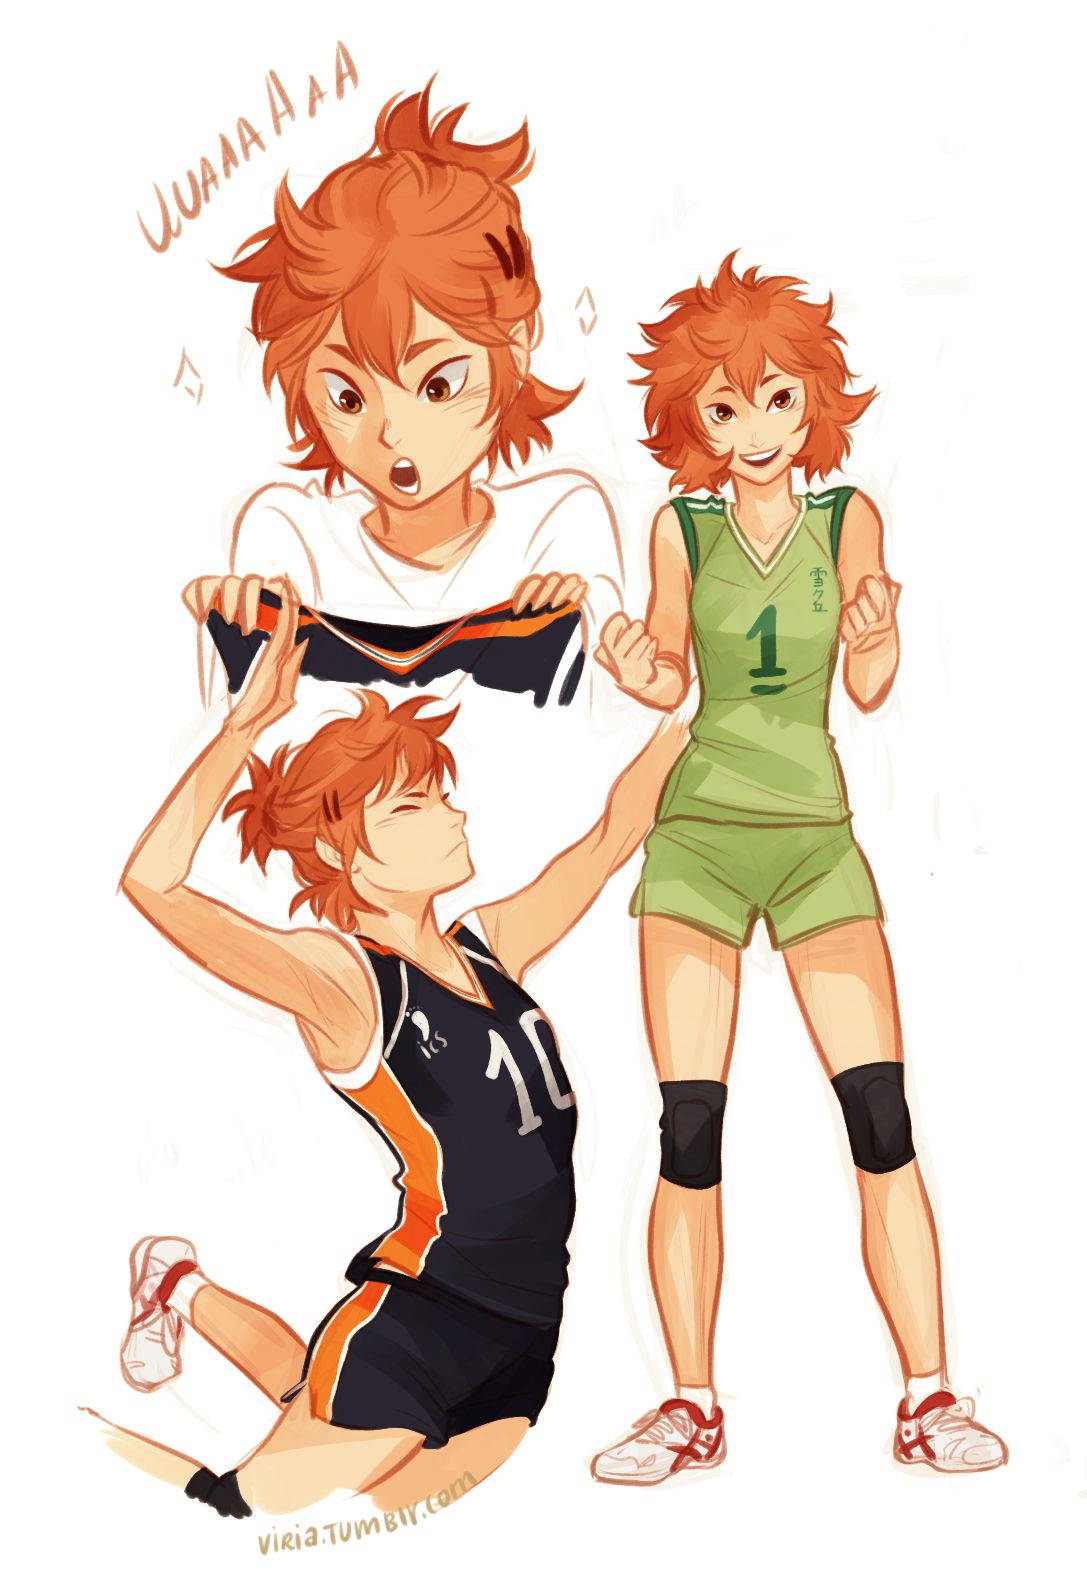 The passionate and ambitious Hinata Shouyou strives to achieve his dream of becoming the greatest volleyball player in the world. Wallpaper